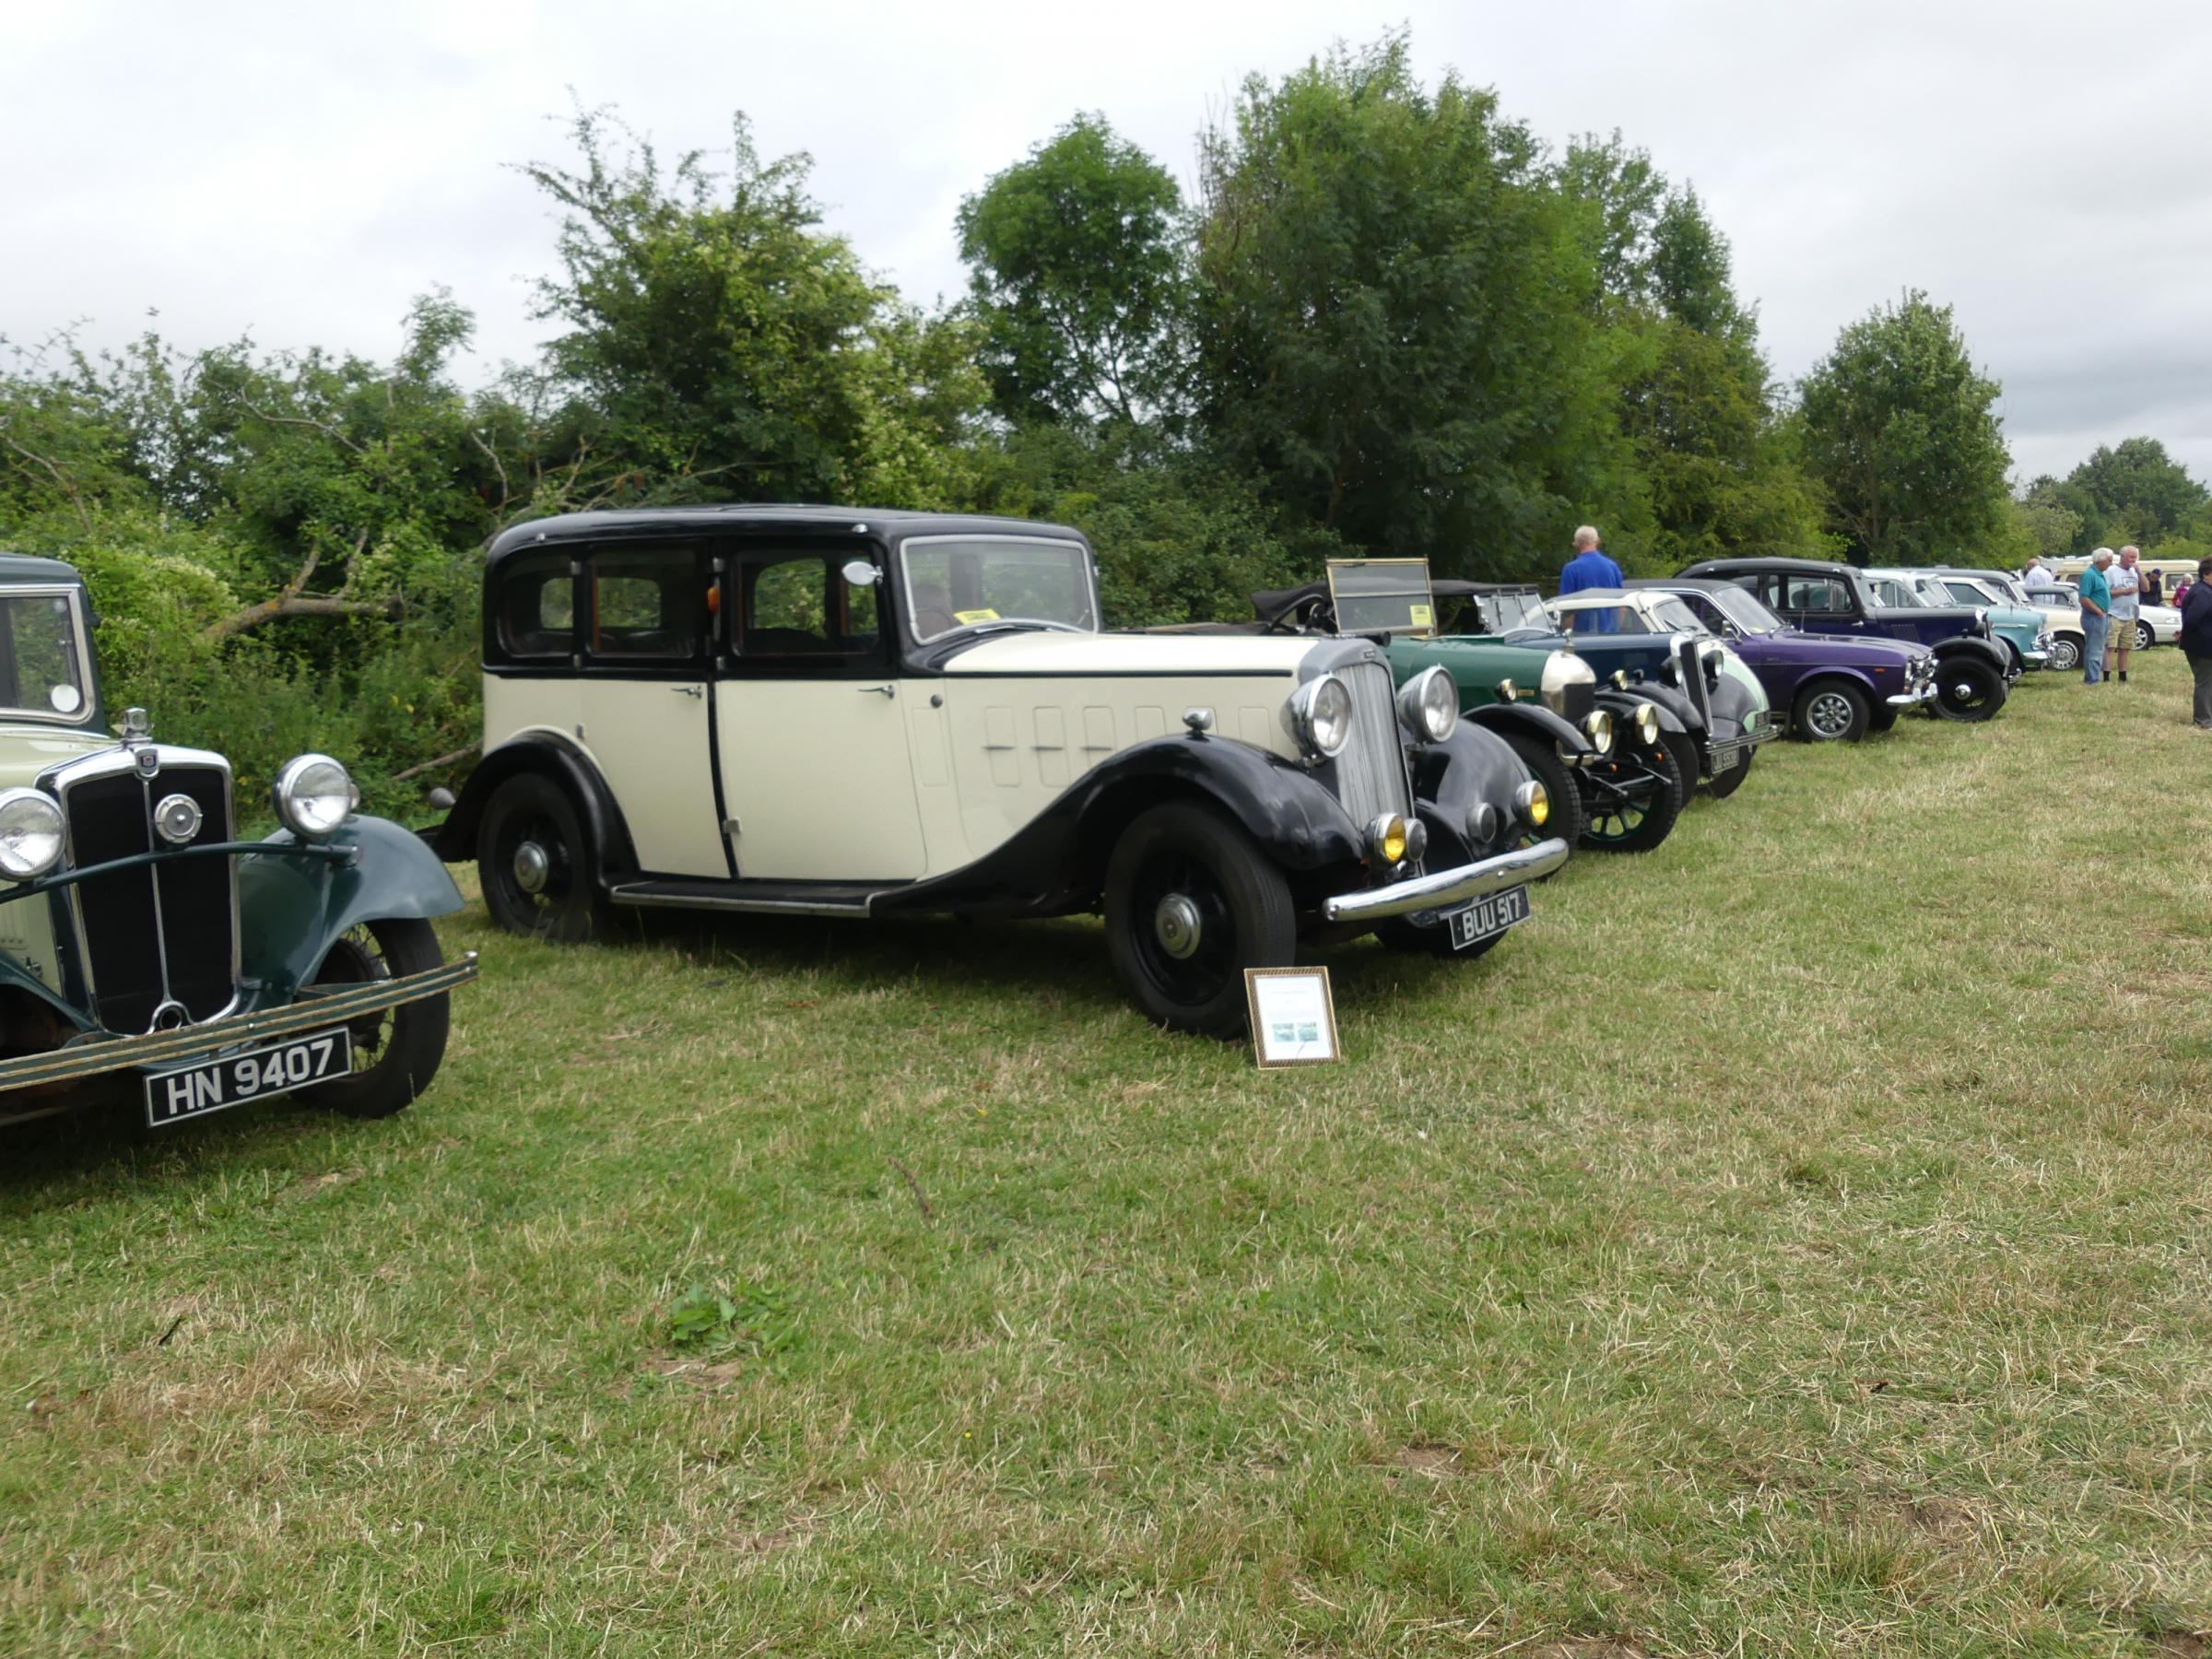 There were a number of classic cars on show at the event